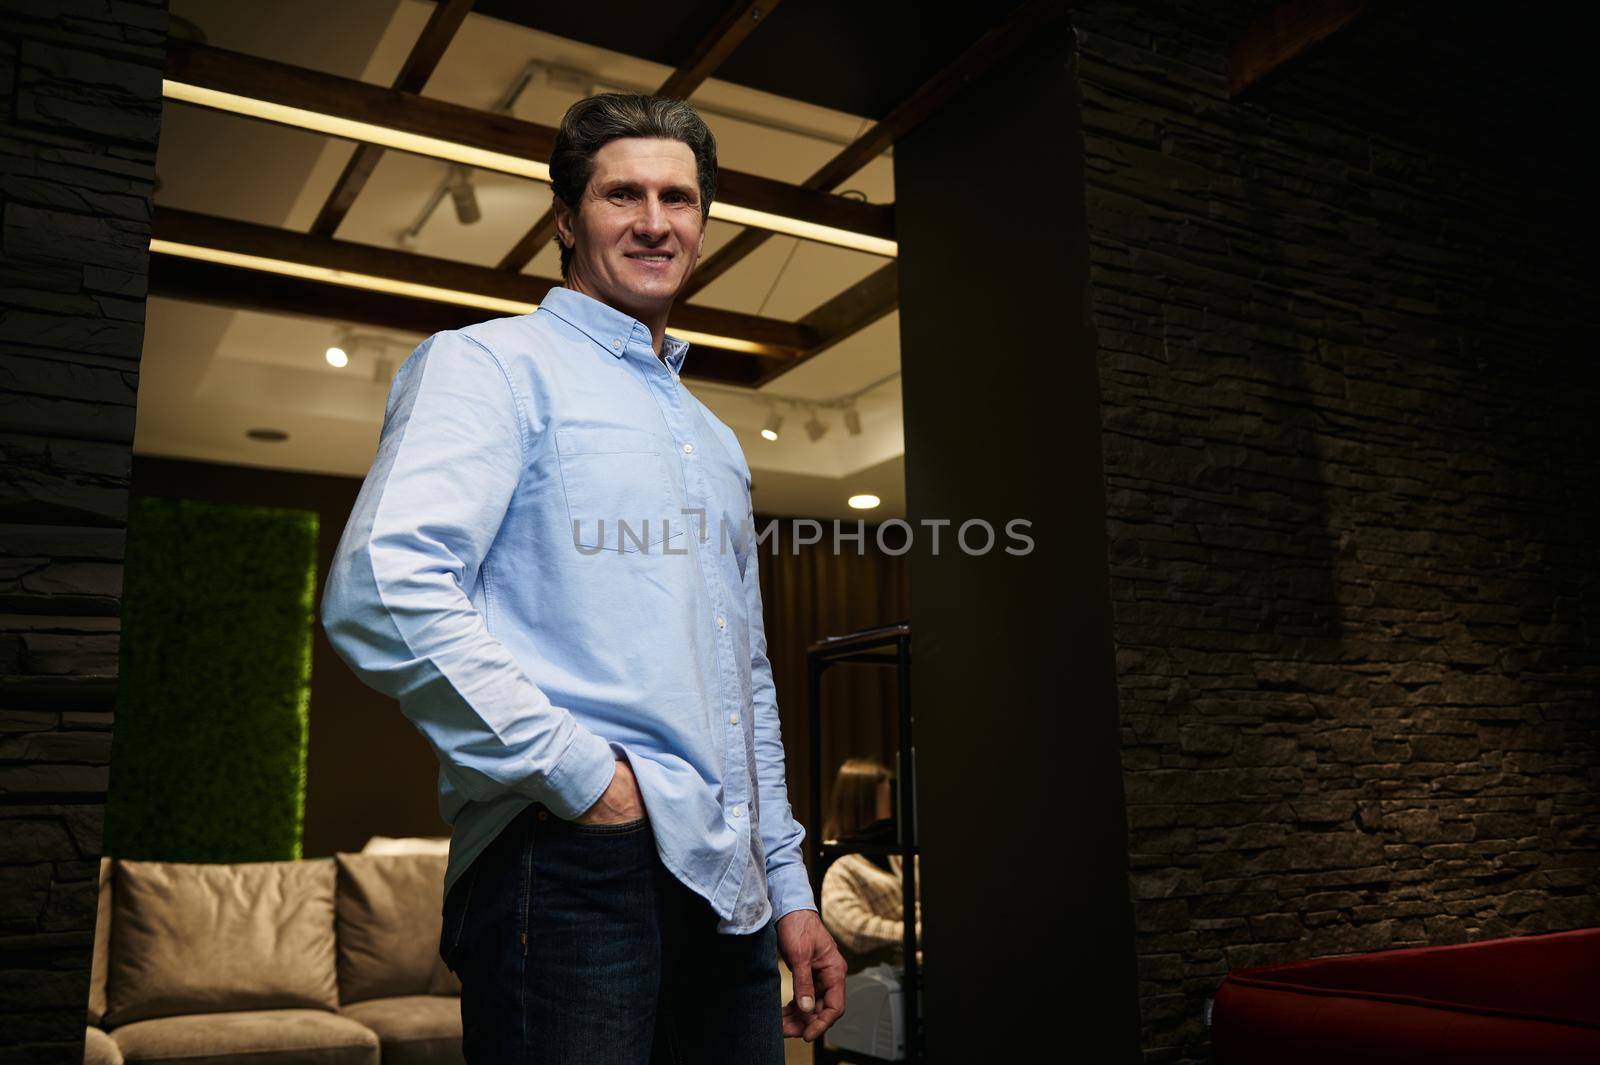 Confident mature Caucasian man - entrepreneur, sales assistant in casual blue shirt and blue denim jeans smiling looking at camera standing in cozy stylish furniture store interior exhibition center